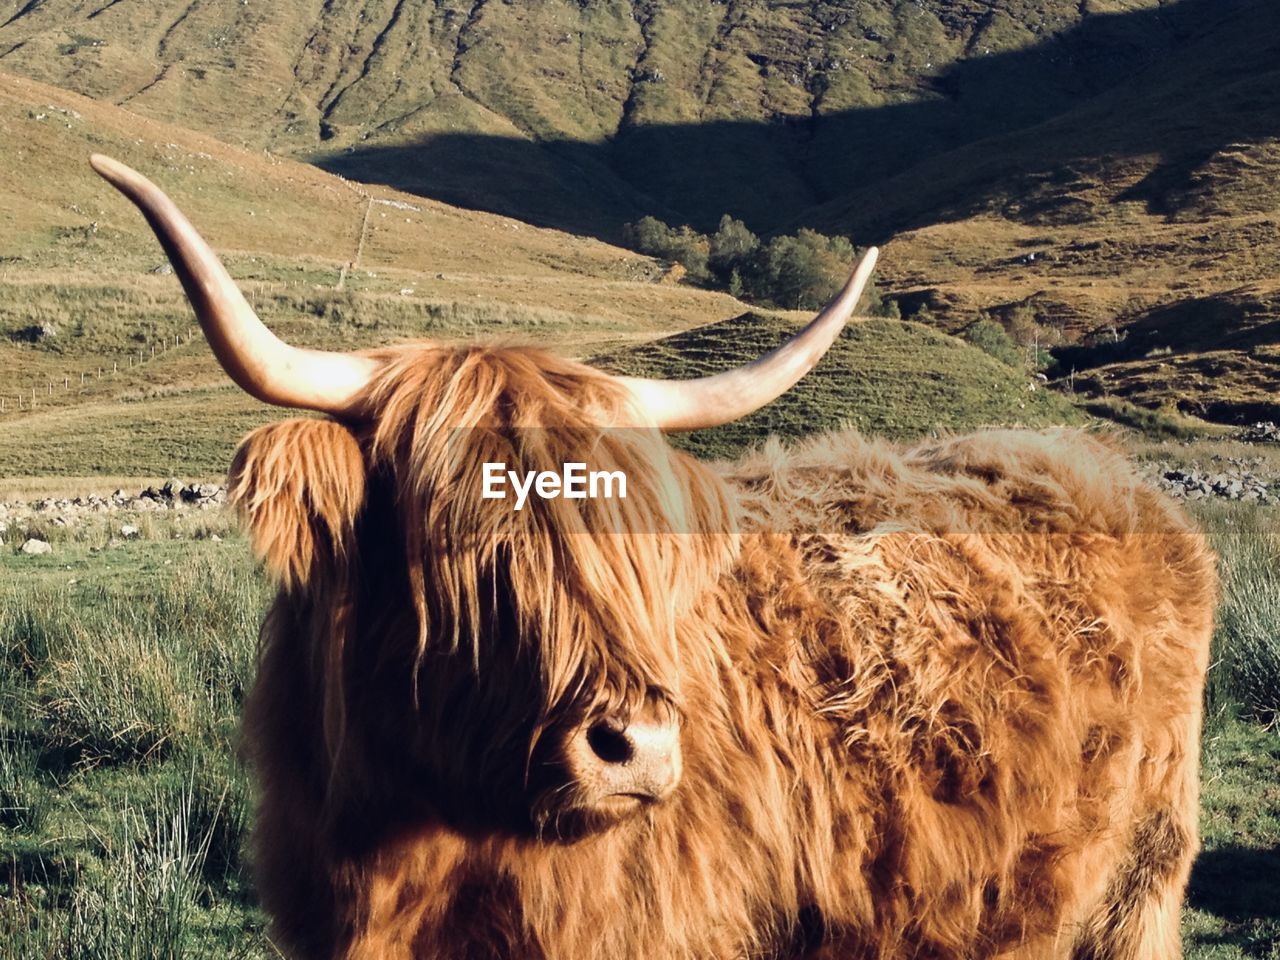 Highland cow in front of a mountain